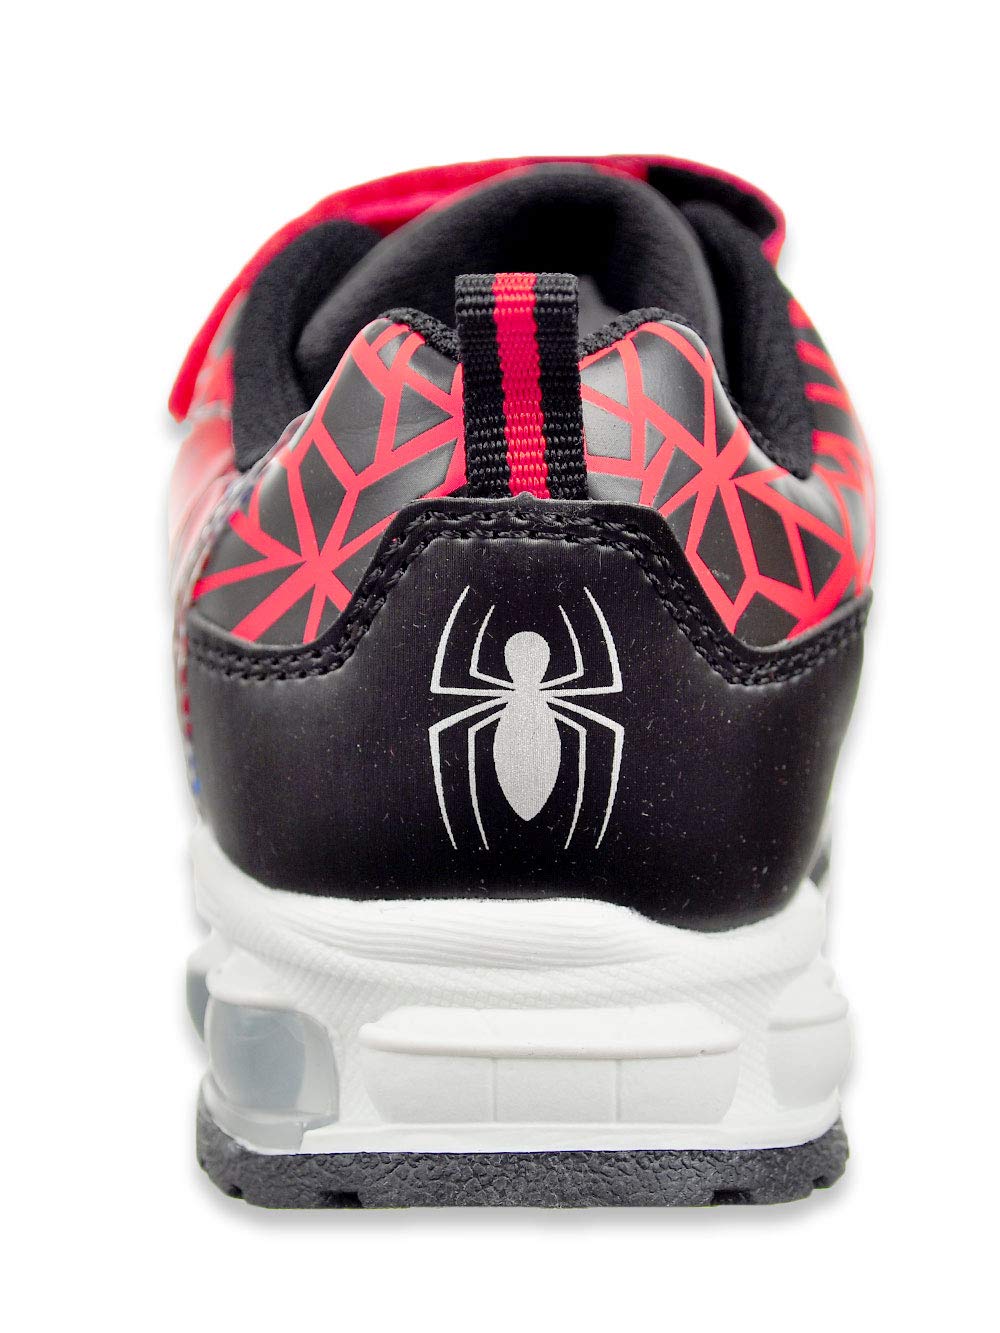 Favorite Characters Boys Marvel Spider-Man Lighted Athletic Sneaker, Red, Toddler, Size 8